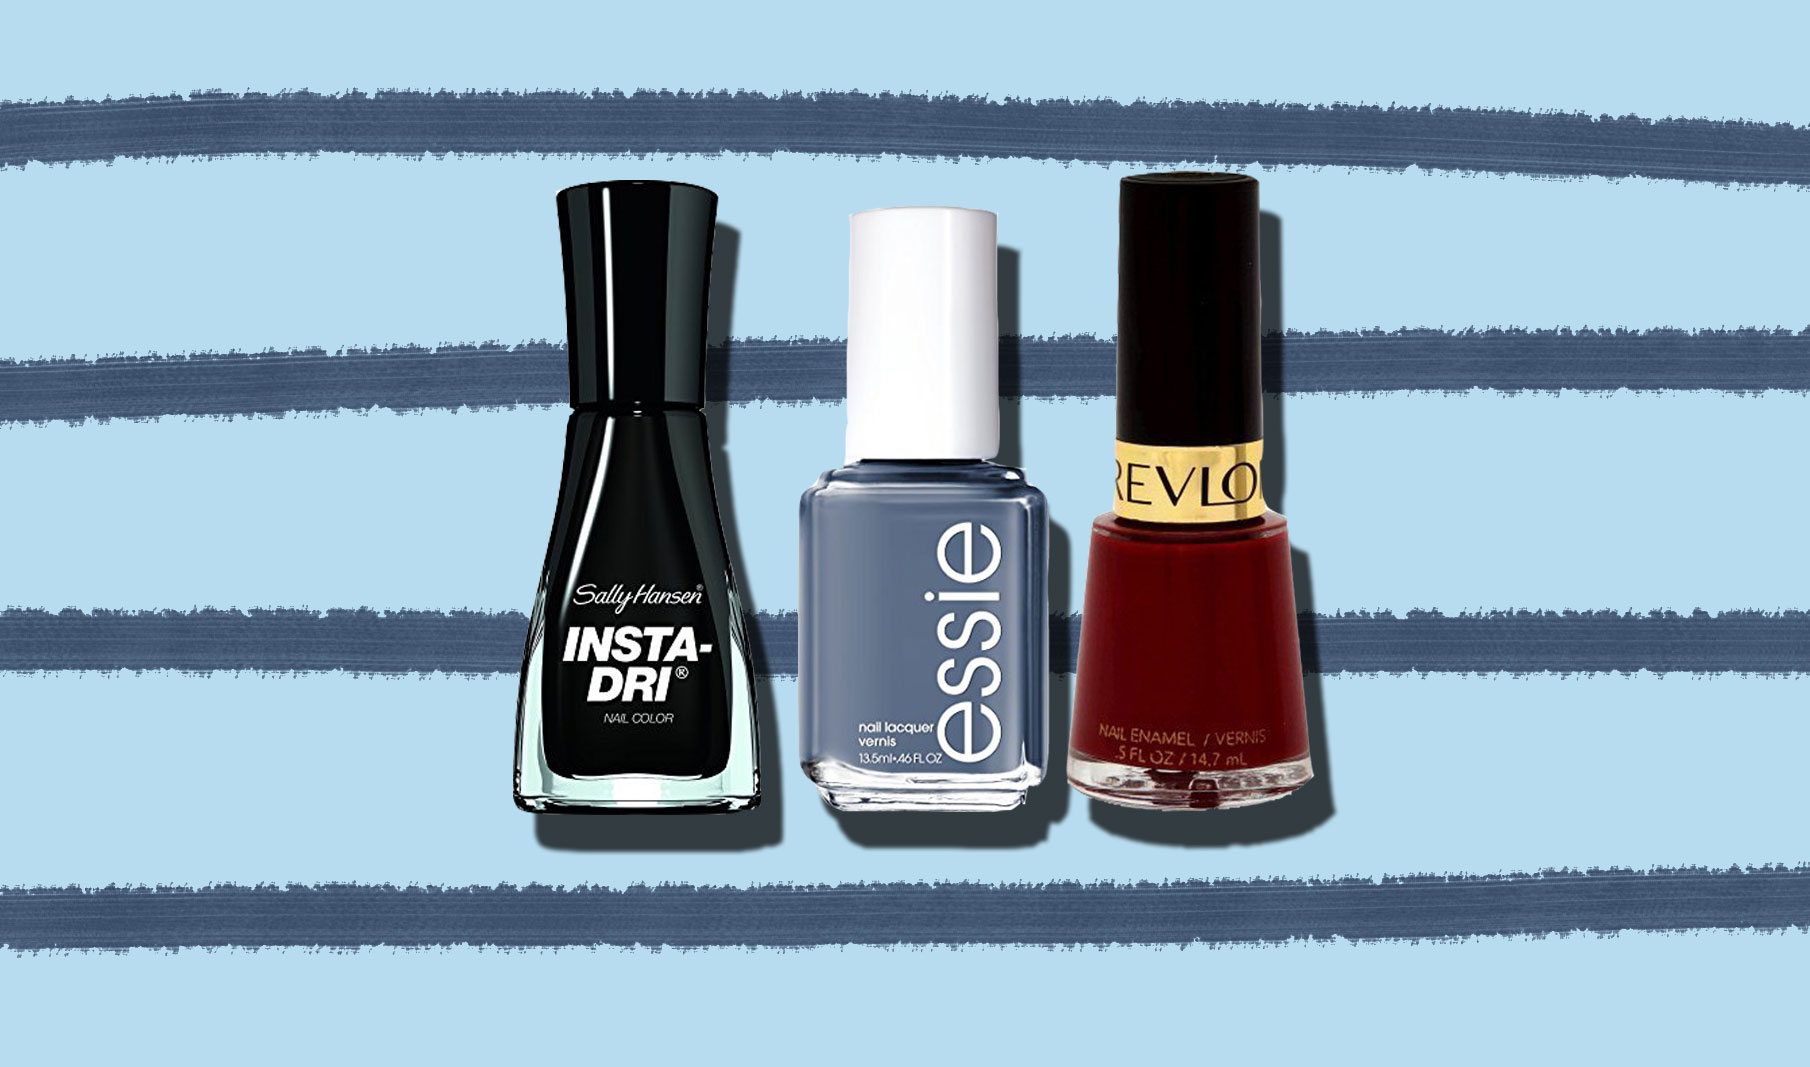 Nail Art Trends For Fall 2018 | Latest Nail Arts And How To Do Them